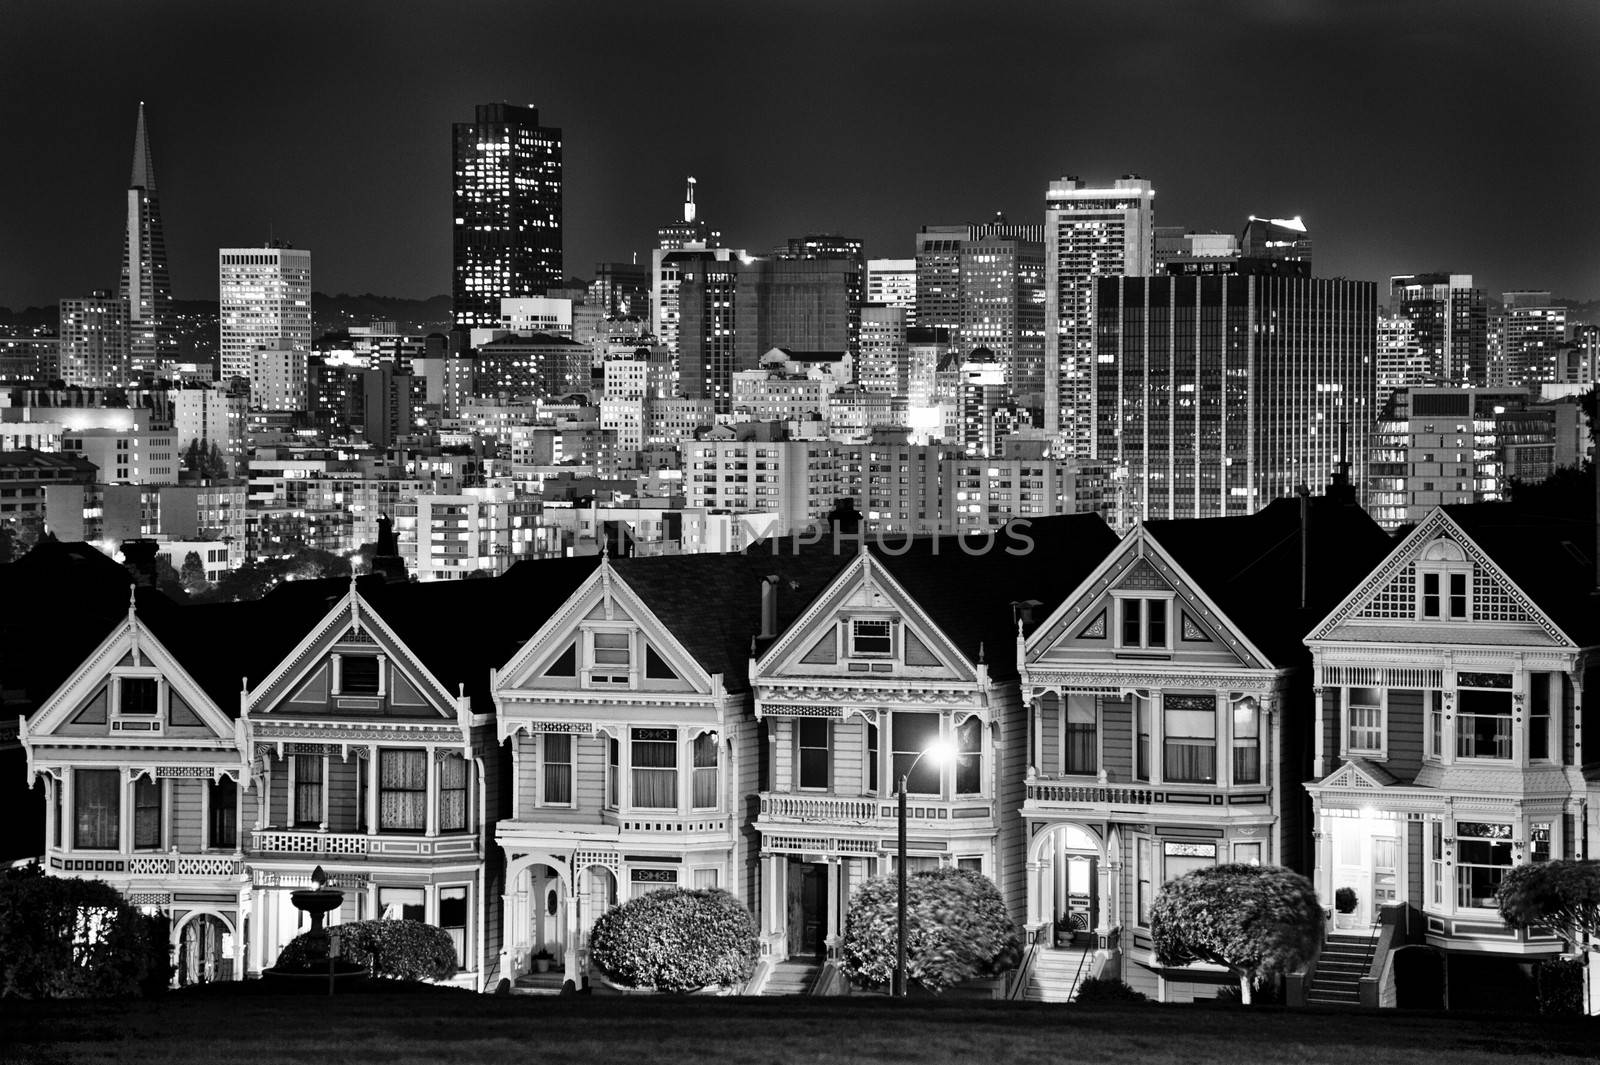 Victorian style houses, Alamo Square, San Francisco, California, by CelsoDiniz